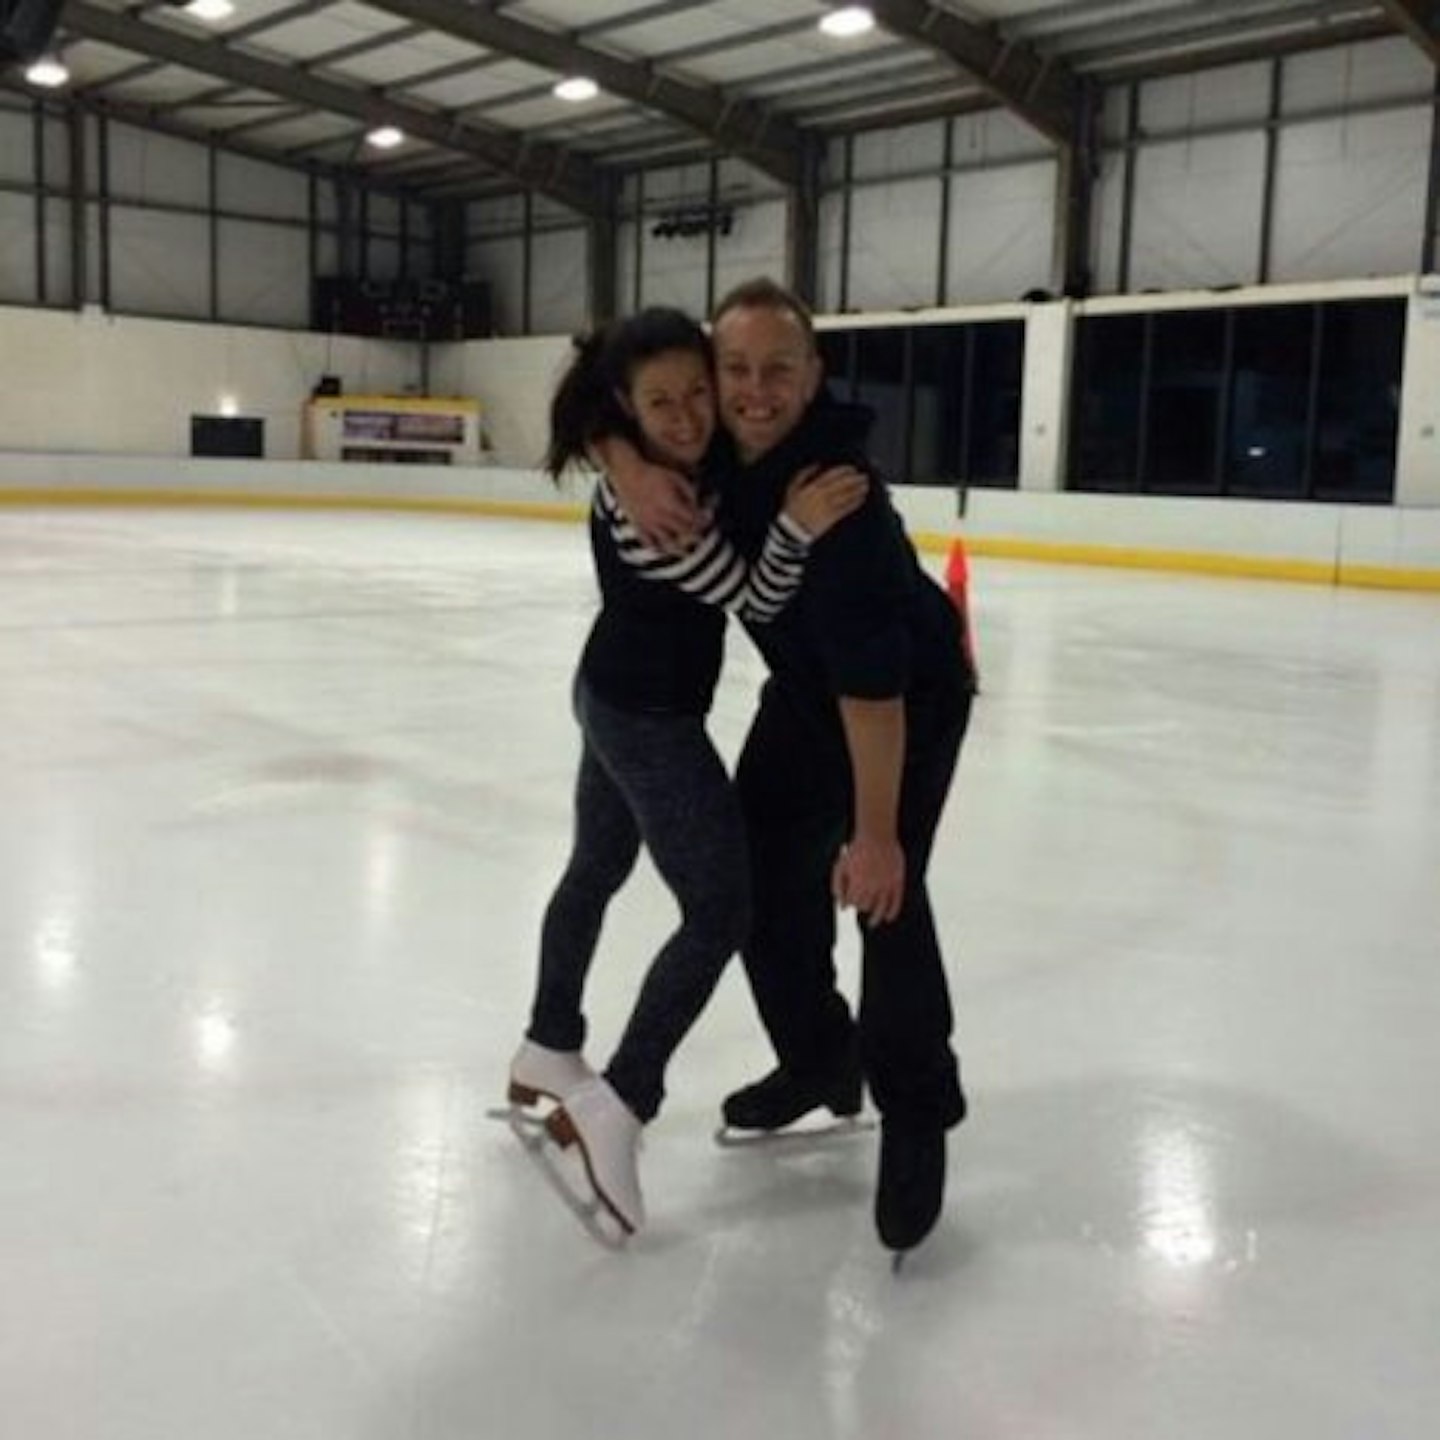 Dan and Hayley on the ice